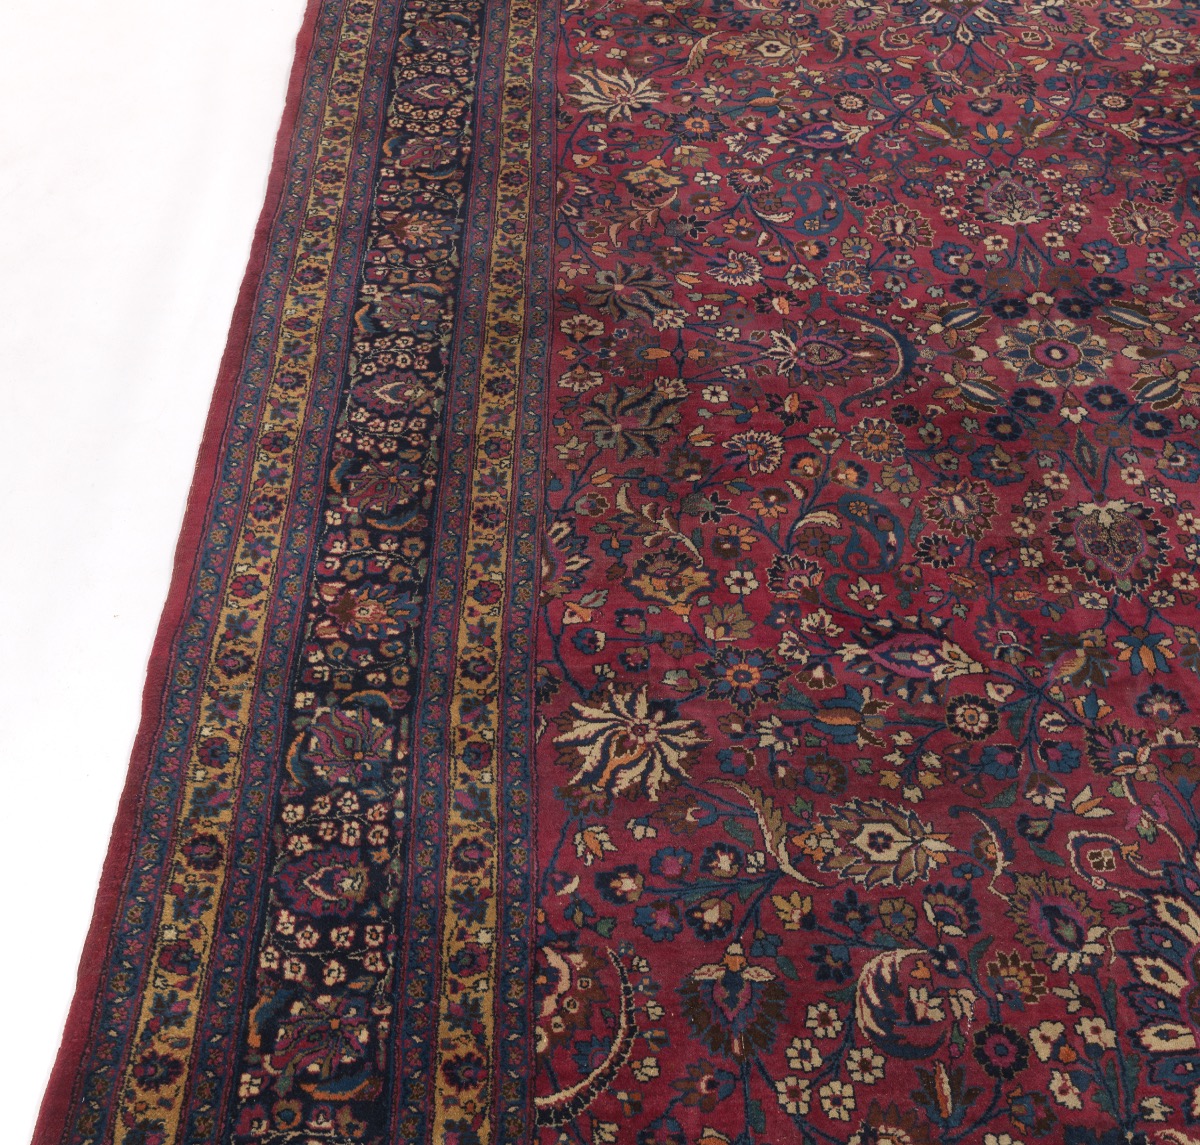 Very Fine Semi Antique Hand Knotted Carpet - Image 4 of 7